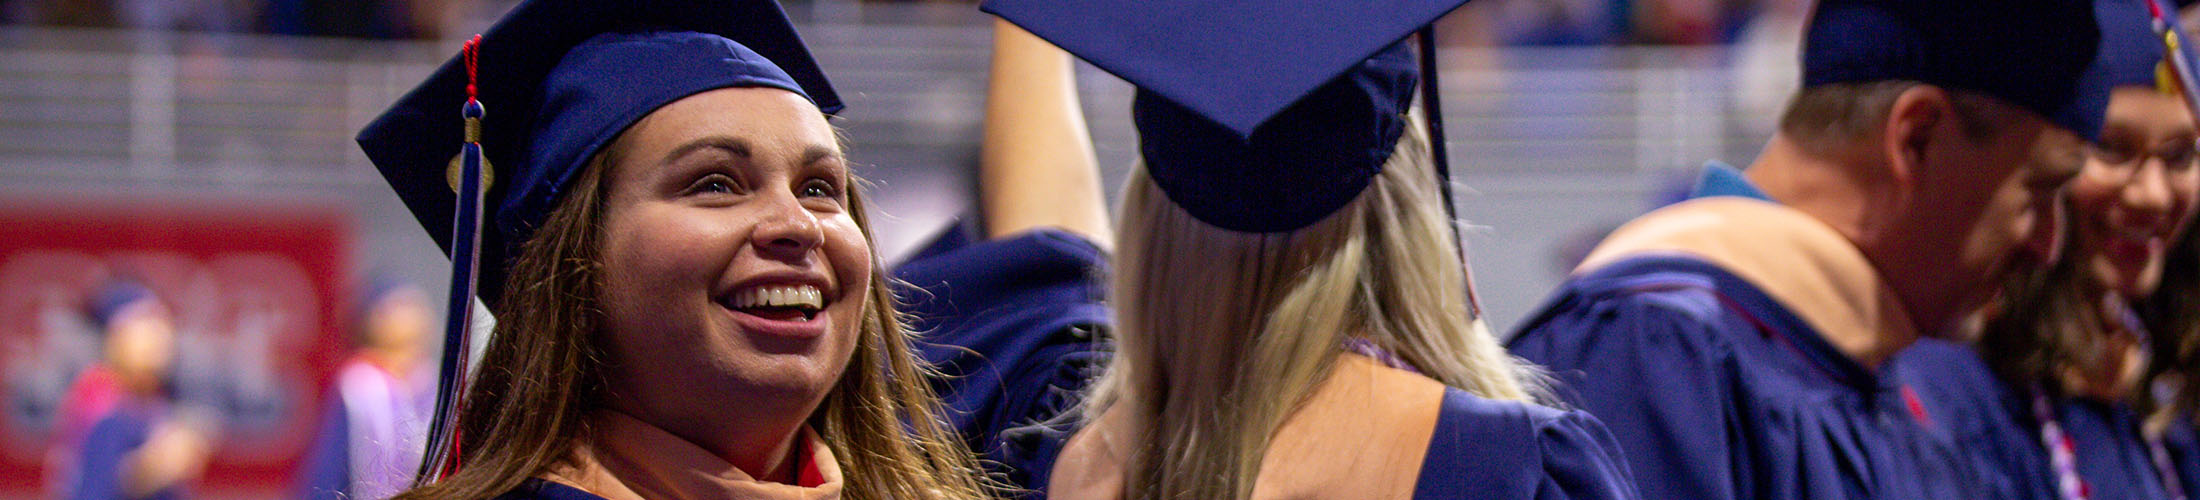 Female student at graduation looking up and smiling in her cap and gown.